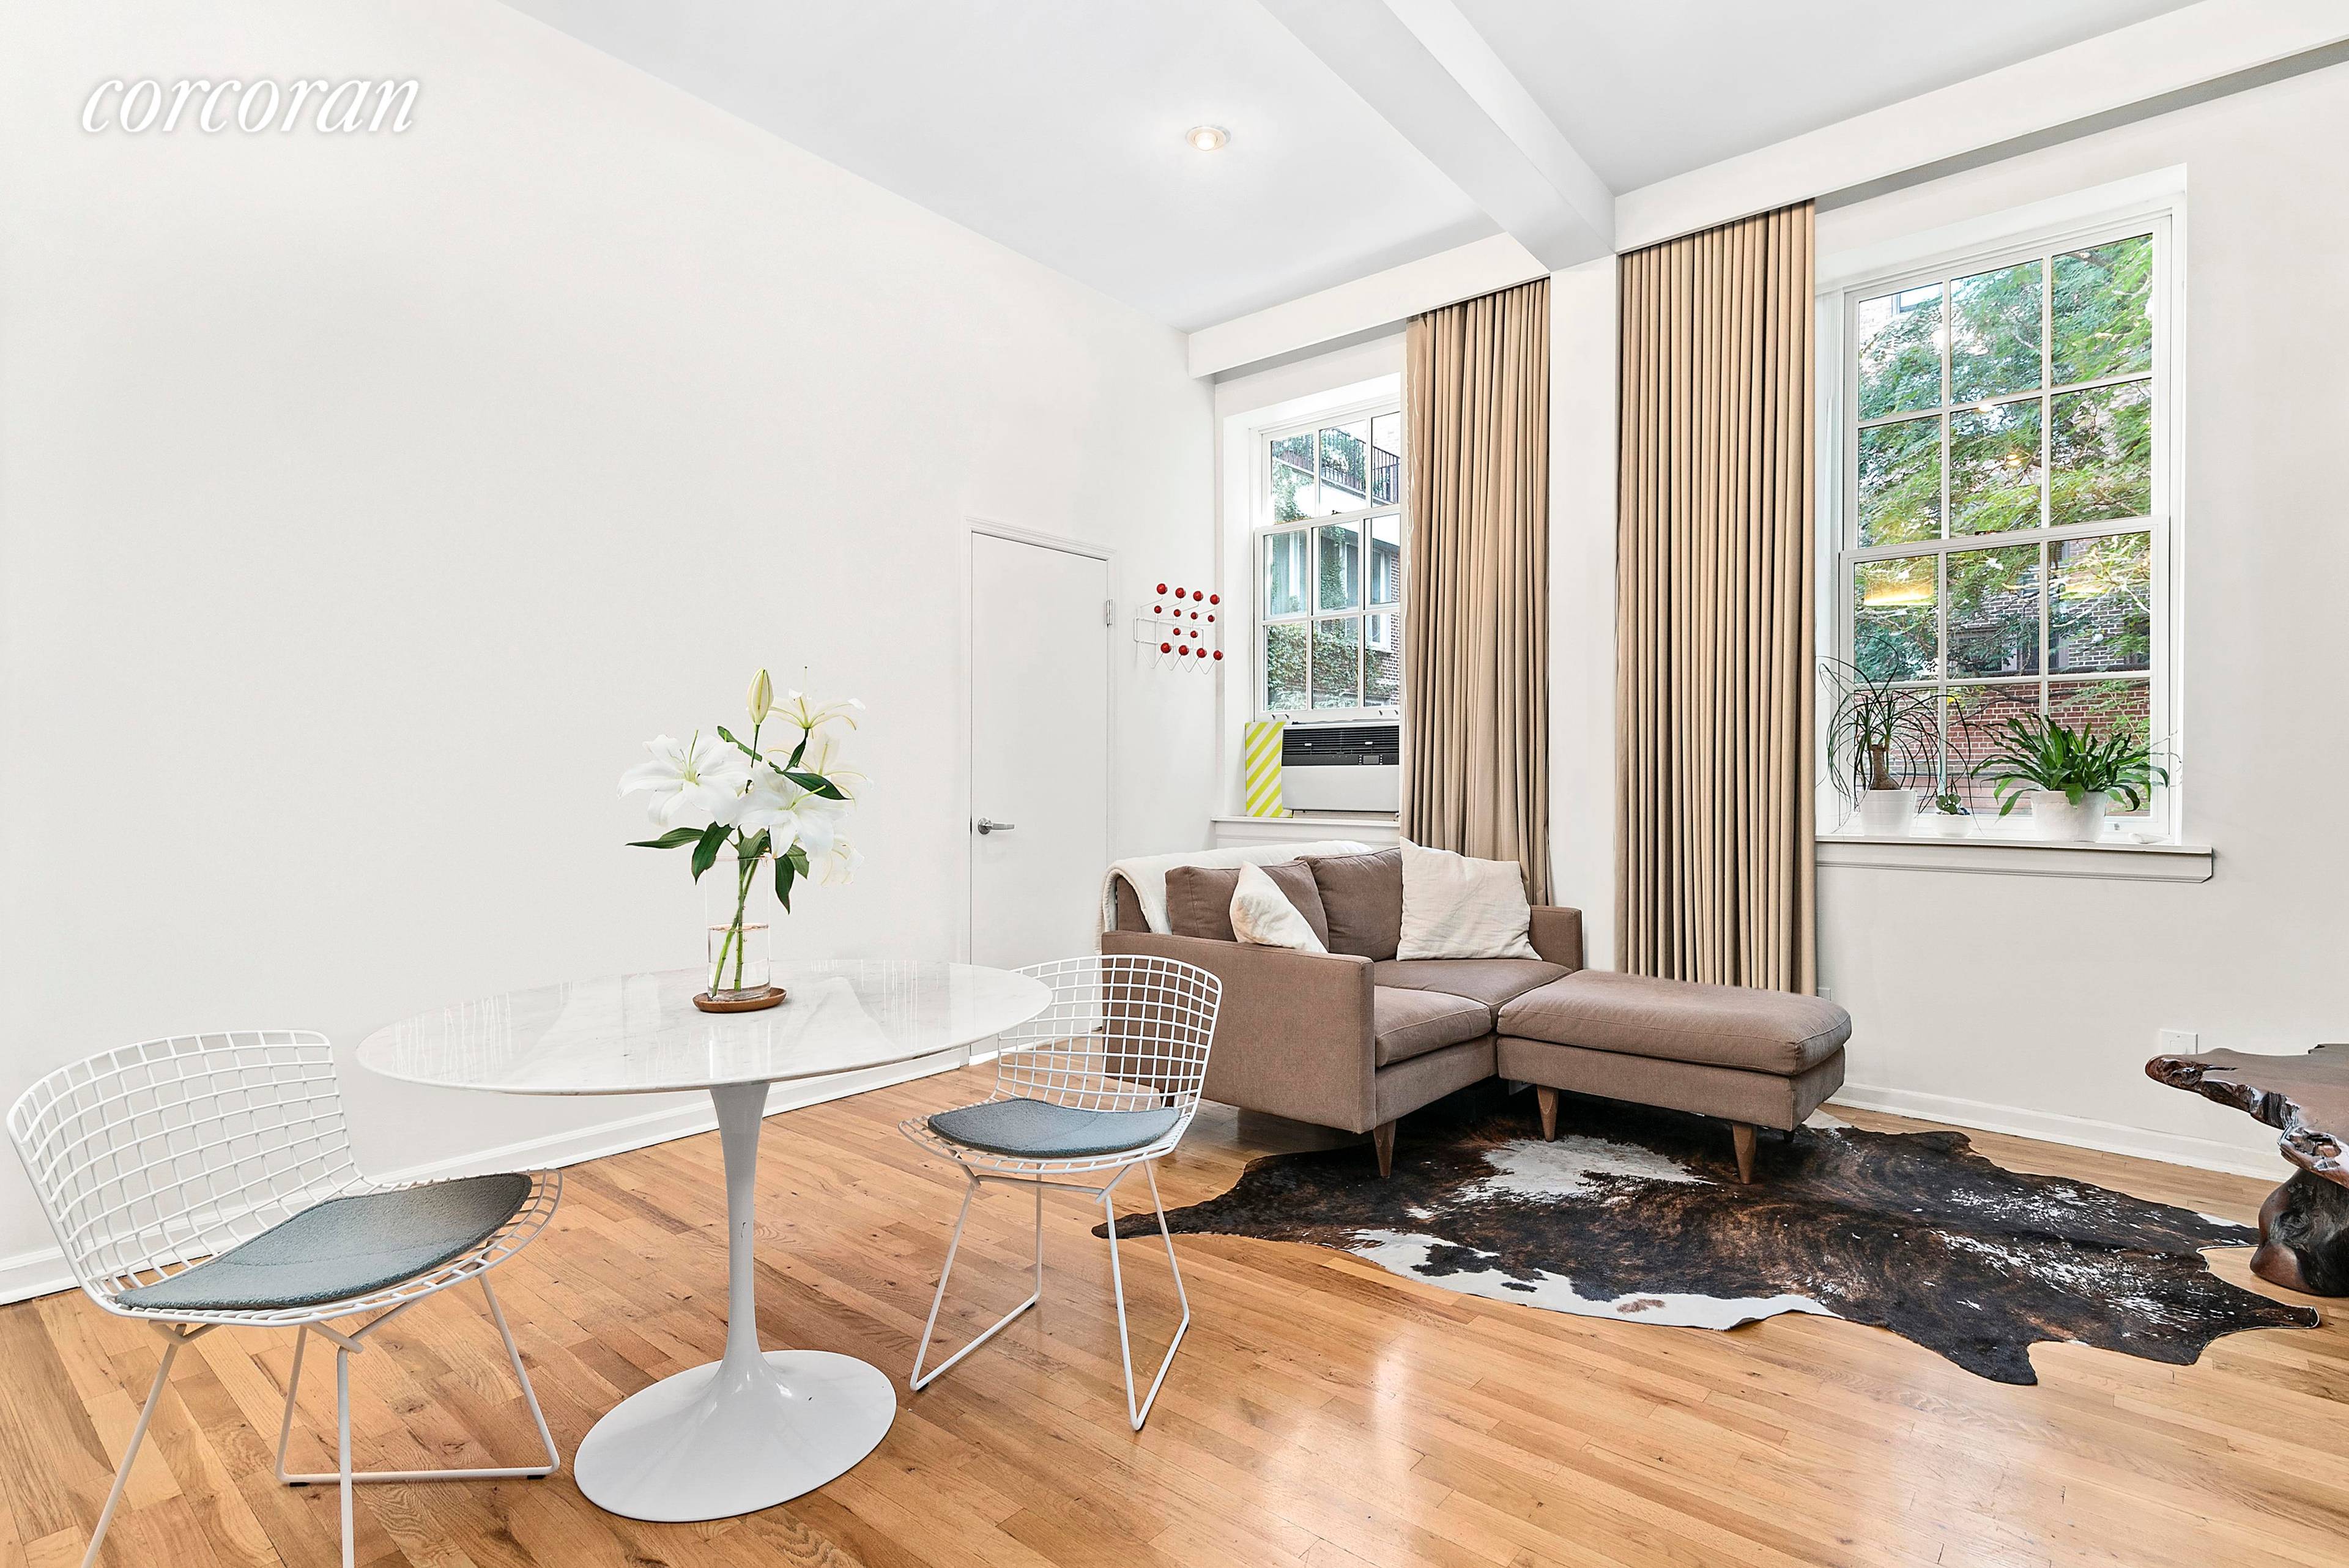 Pin drop quiet and super cute this one bedroom West Village co op apartment really packs a punch.